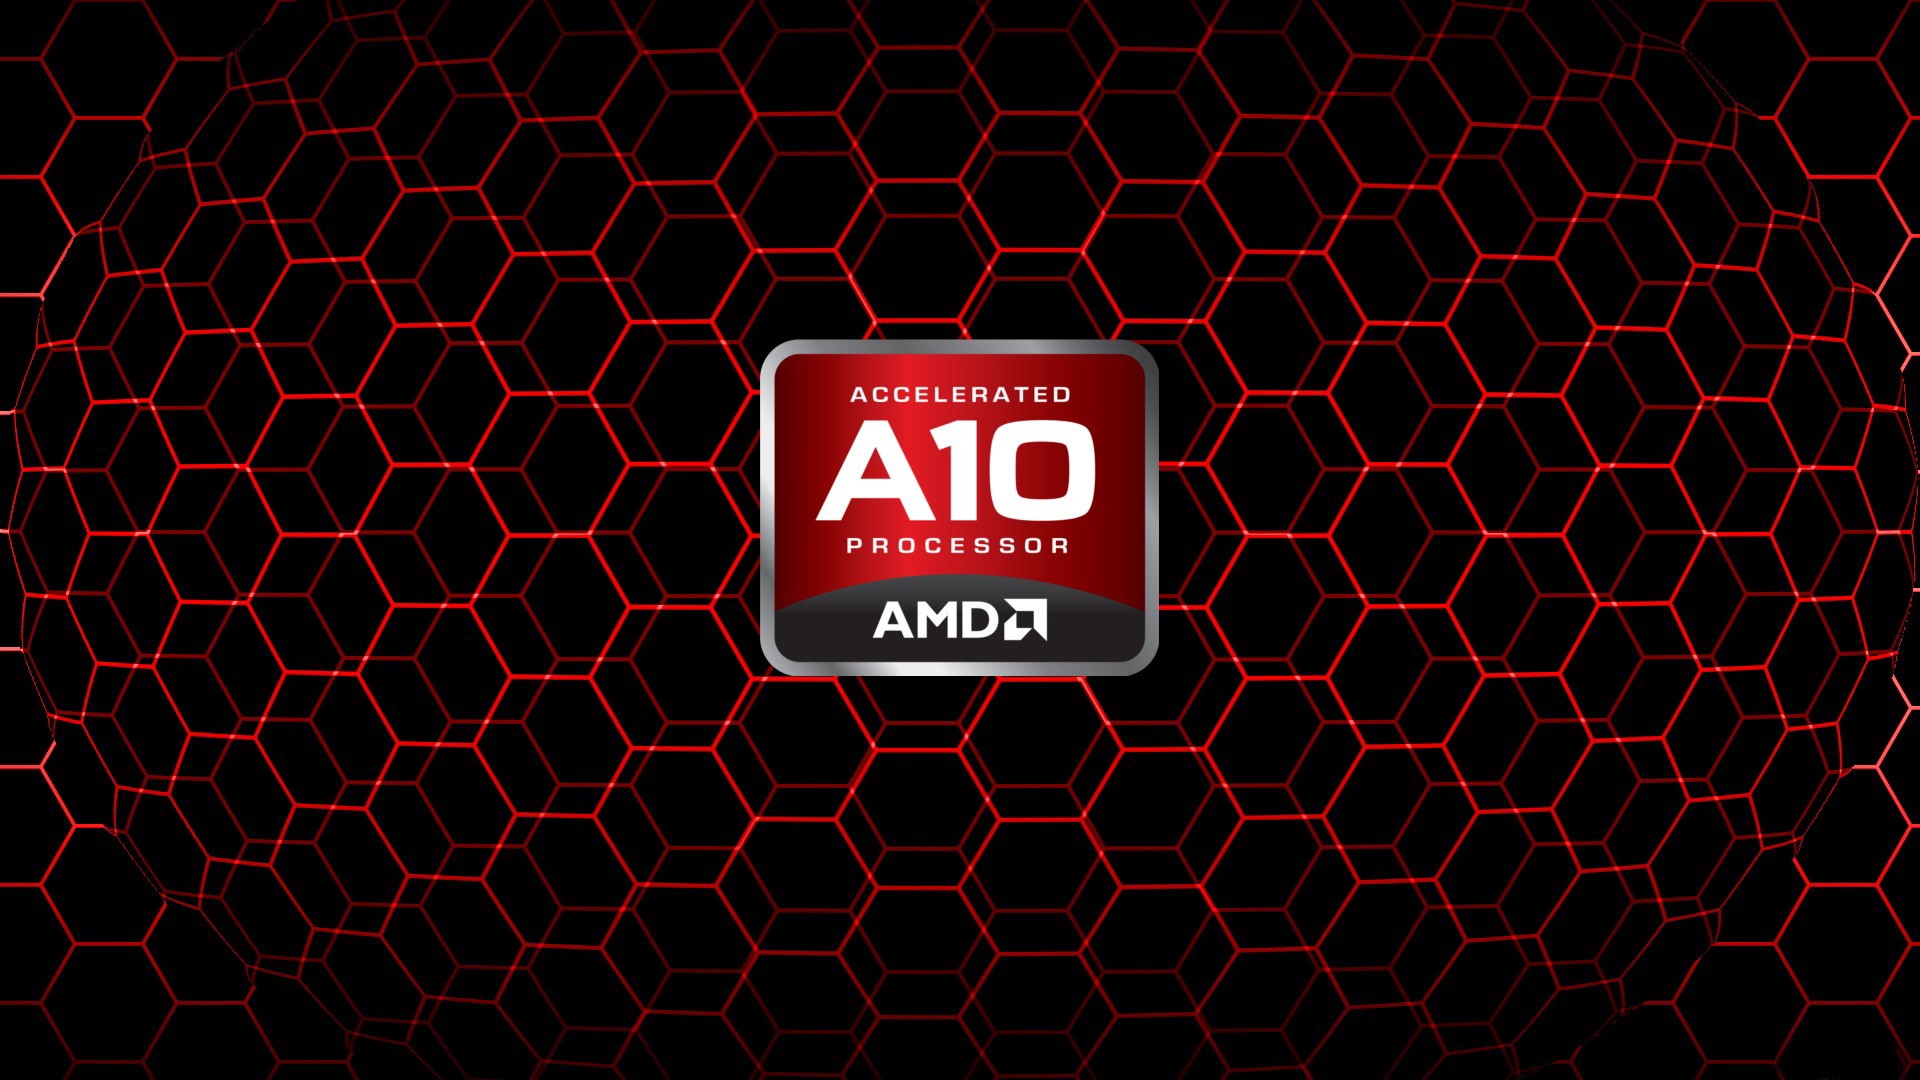 General 1920x1080 AMD numbers texture red black technology computer hardware logo